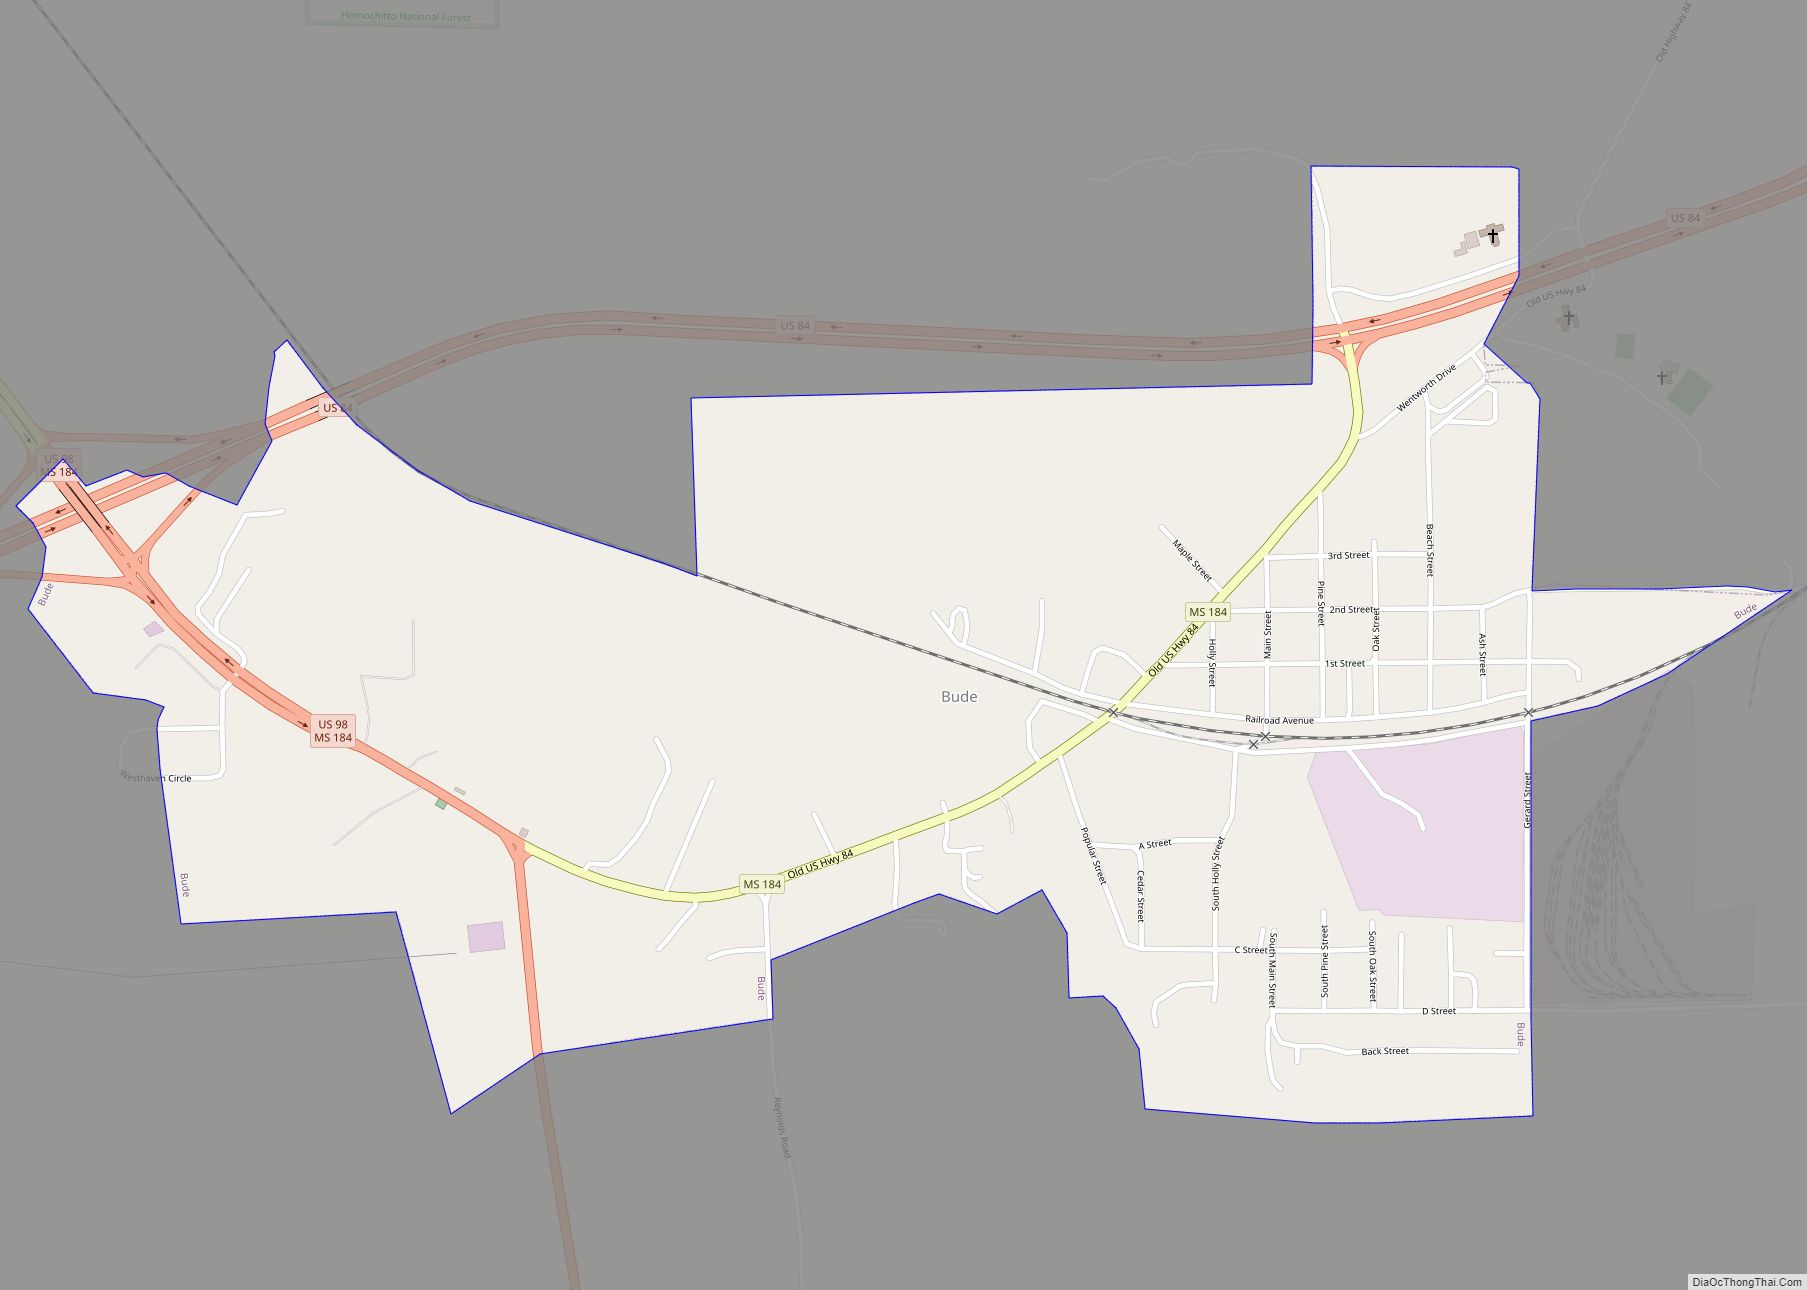 Map of Bude town